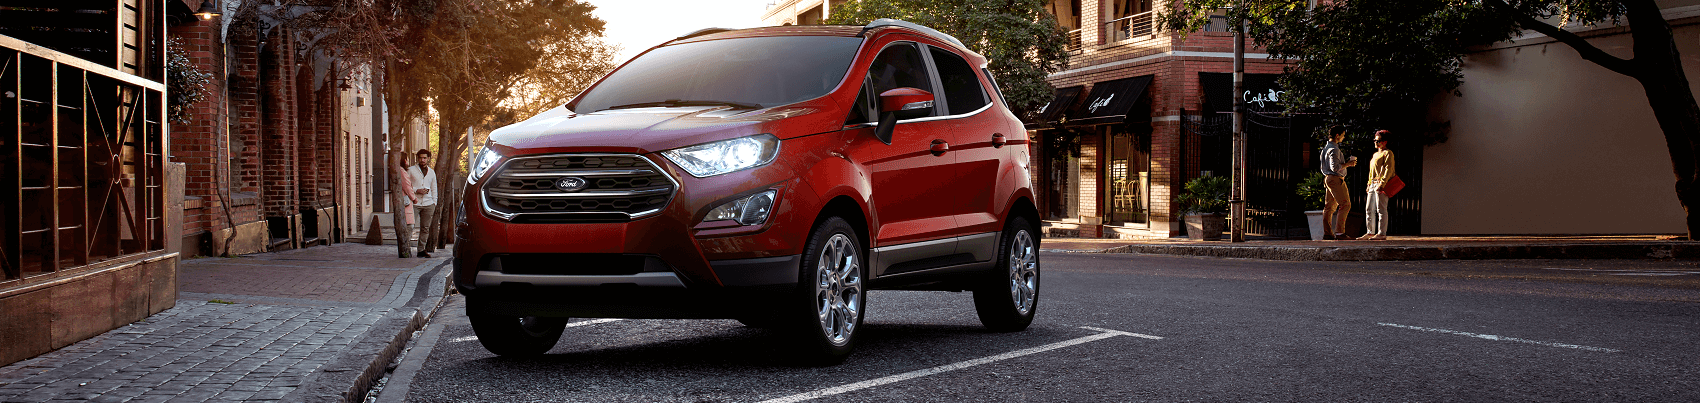 2021 Ford EcoSport parked in town